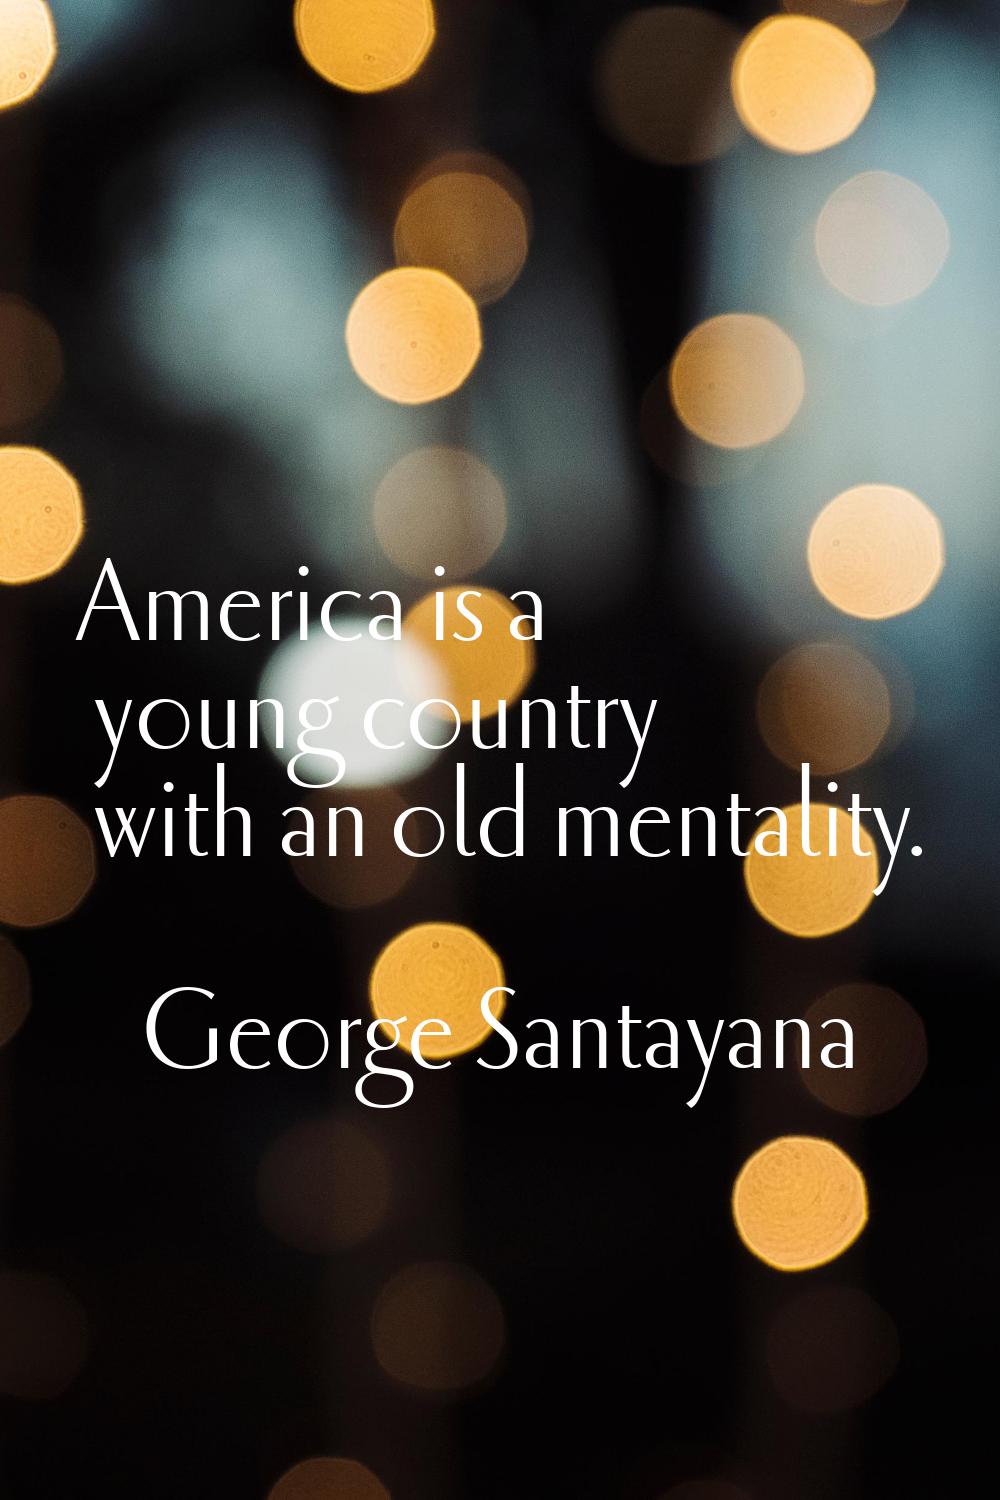 America is a young country with an old mentality.